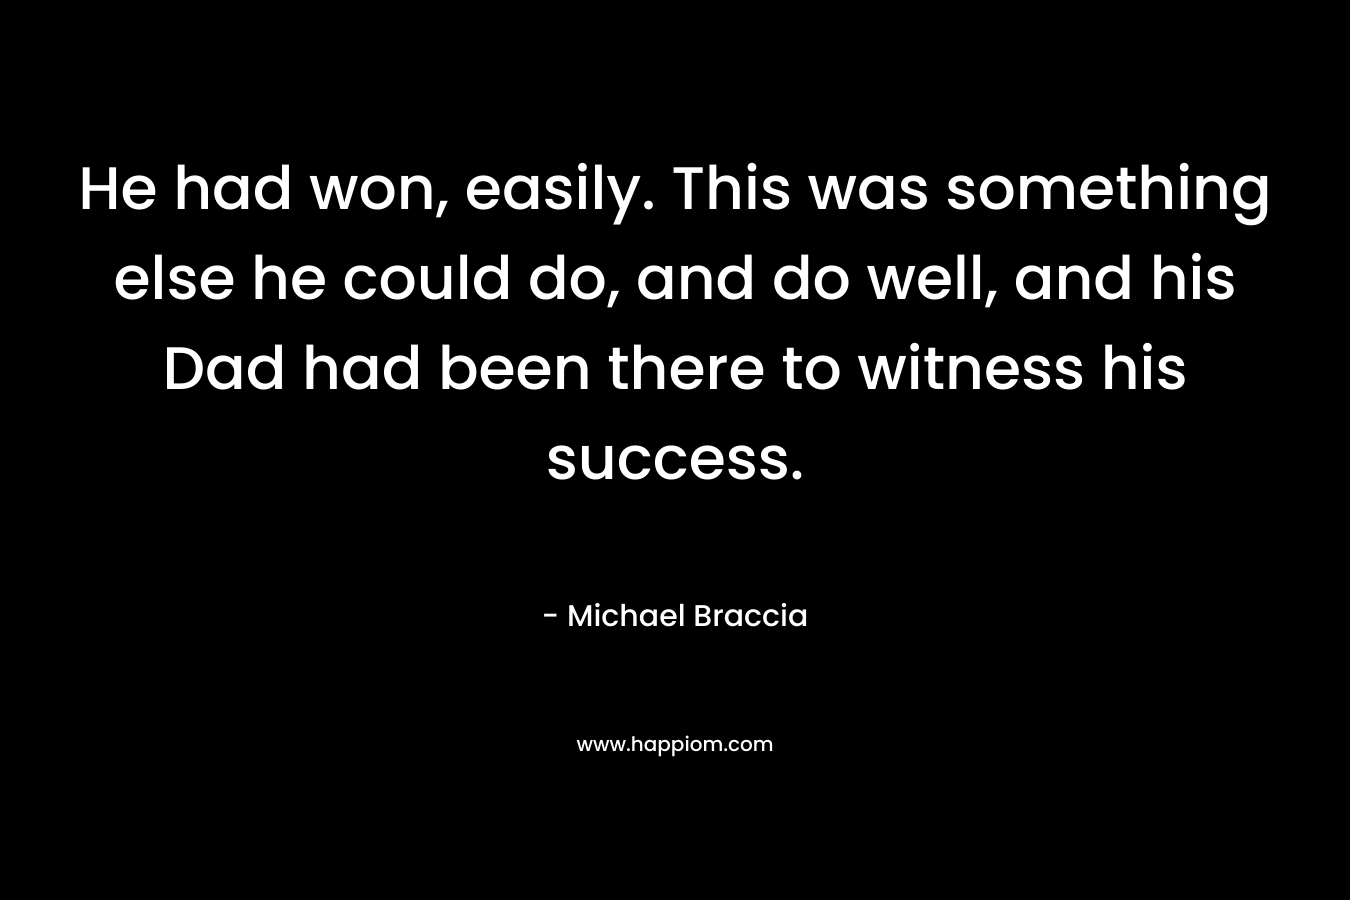 He had won, easily. This was something else he could do, and do well, and his Dad had been there to witness his success. – Michael Braccia